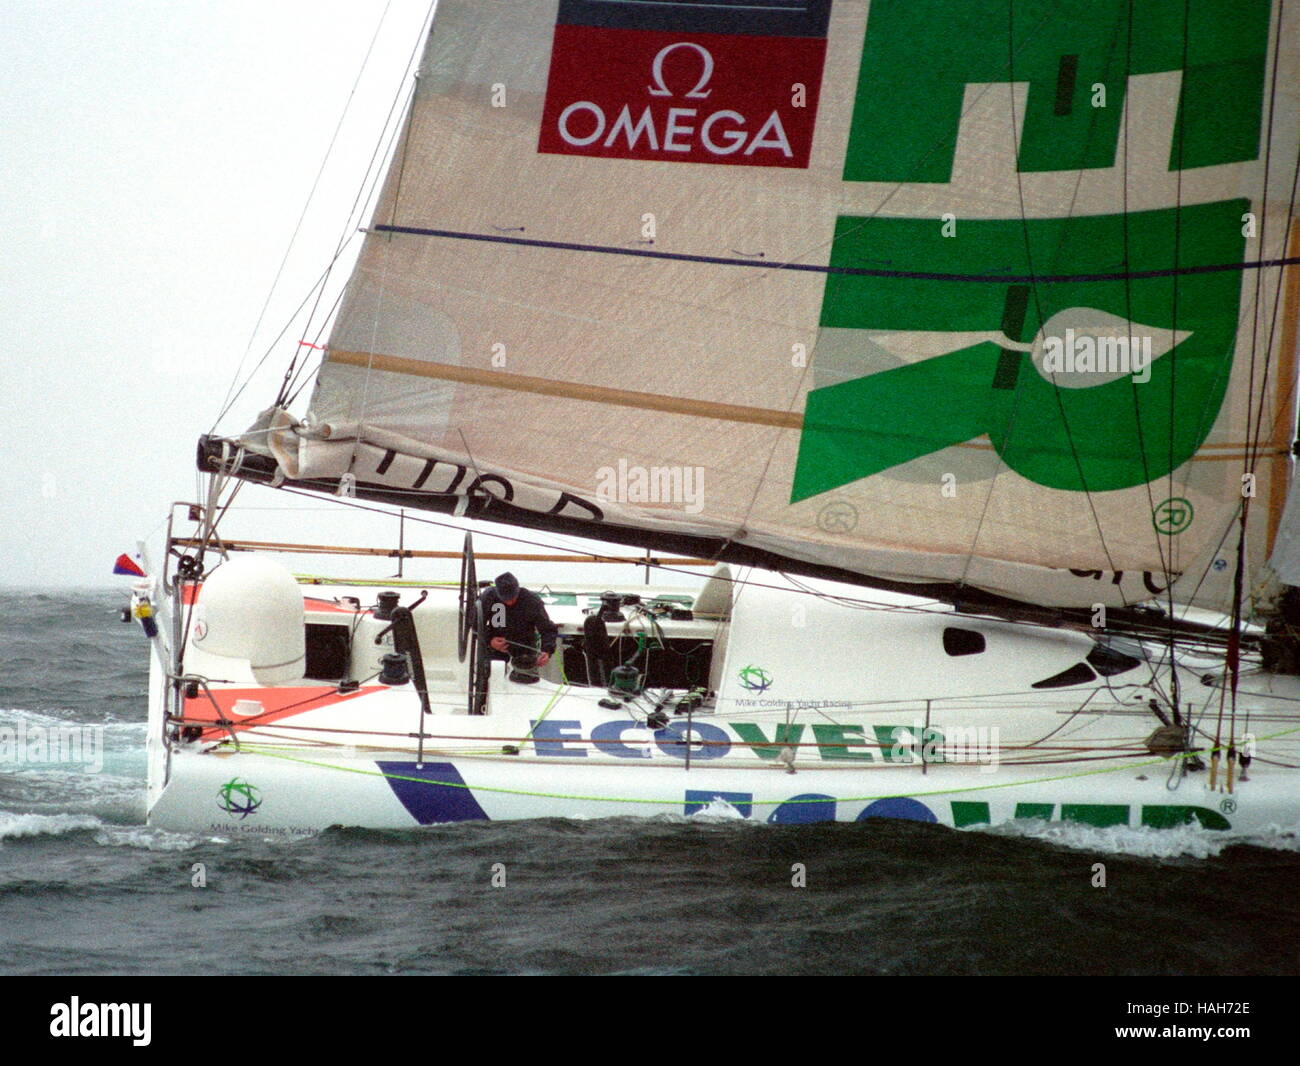 AJAX NEWS PHOTOS. 31ST MAY 2004. PLYMOUTH, ENGLAND. - TRANSAT YACHT RACE - ECOVER IN HEAVY WEATHER AT START. PHOTO:JONATHAN EASTLAND/AJAX  REF:43105 C Stock Photo